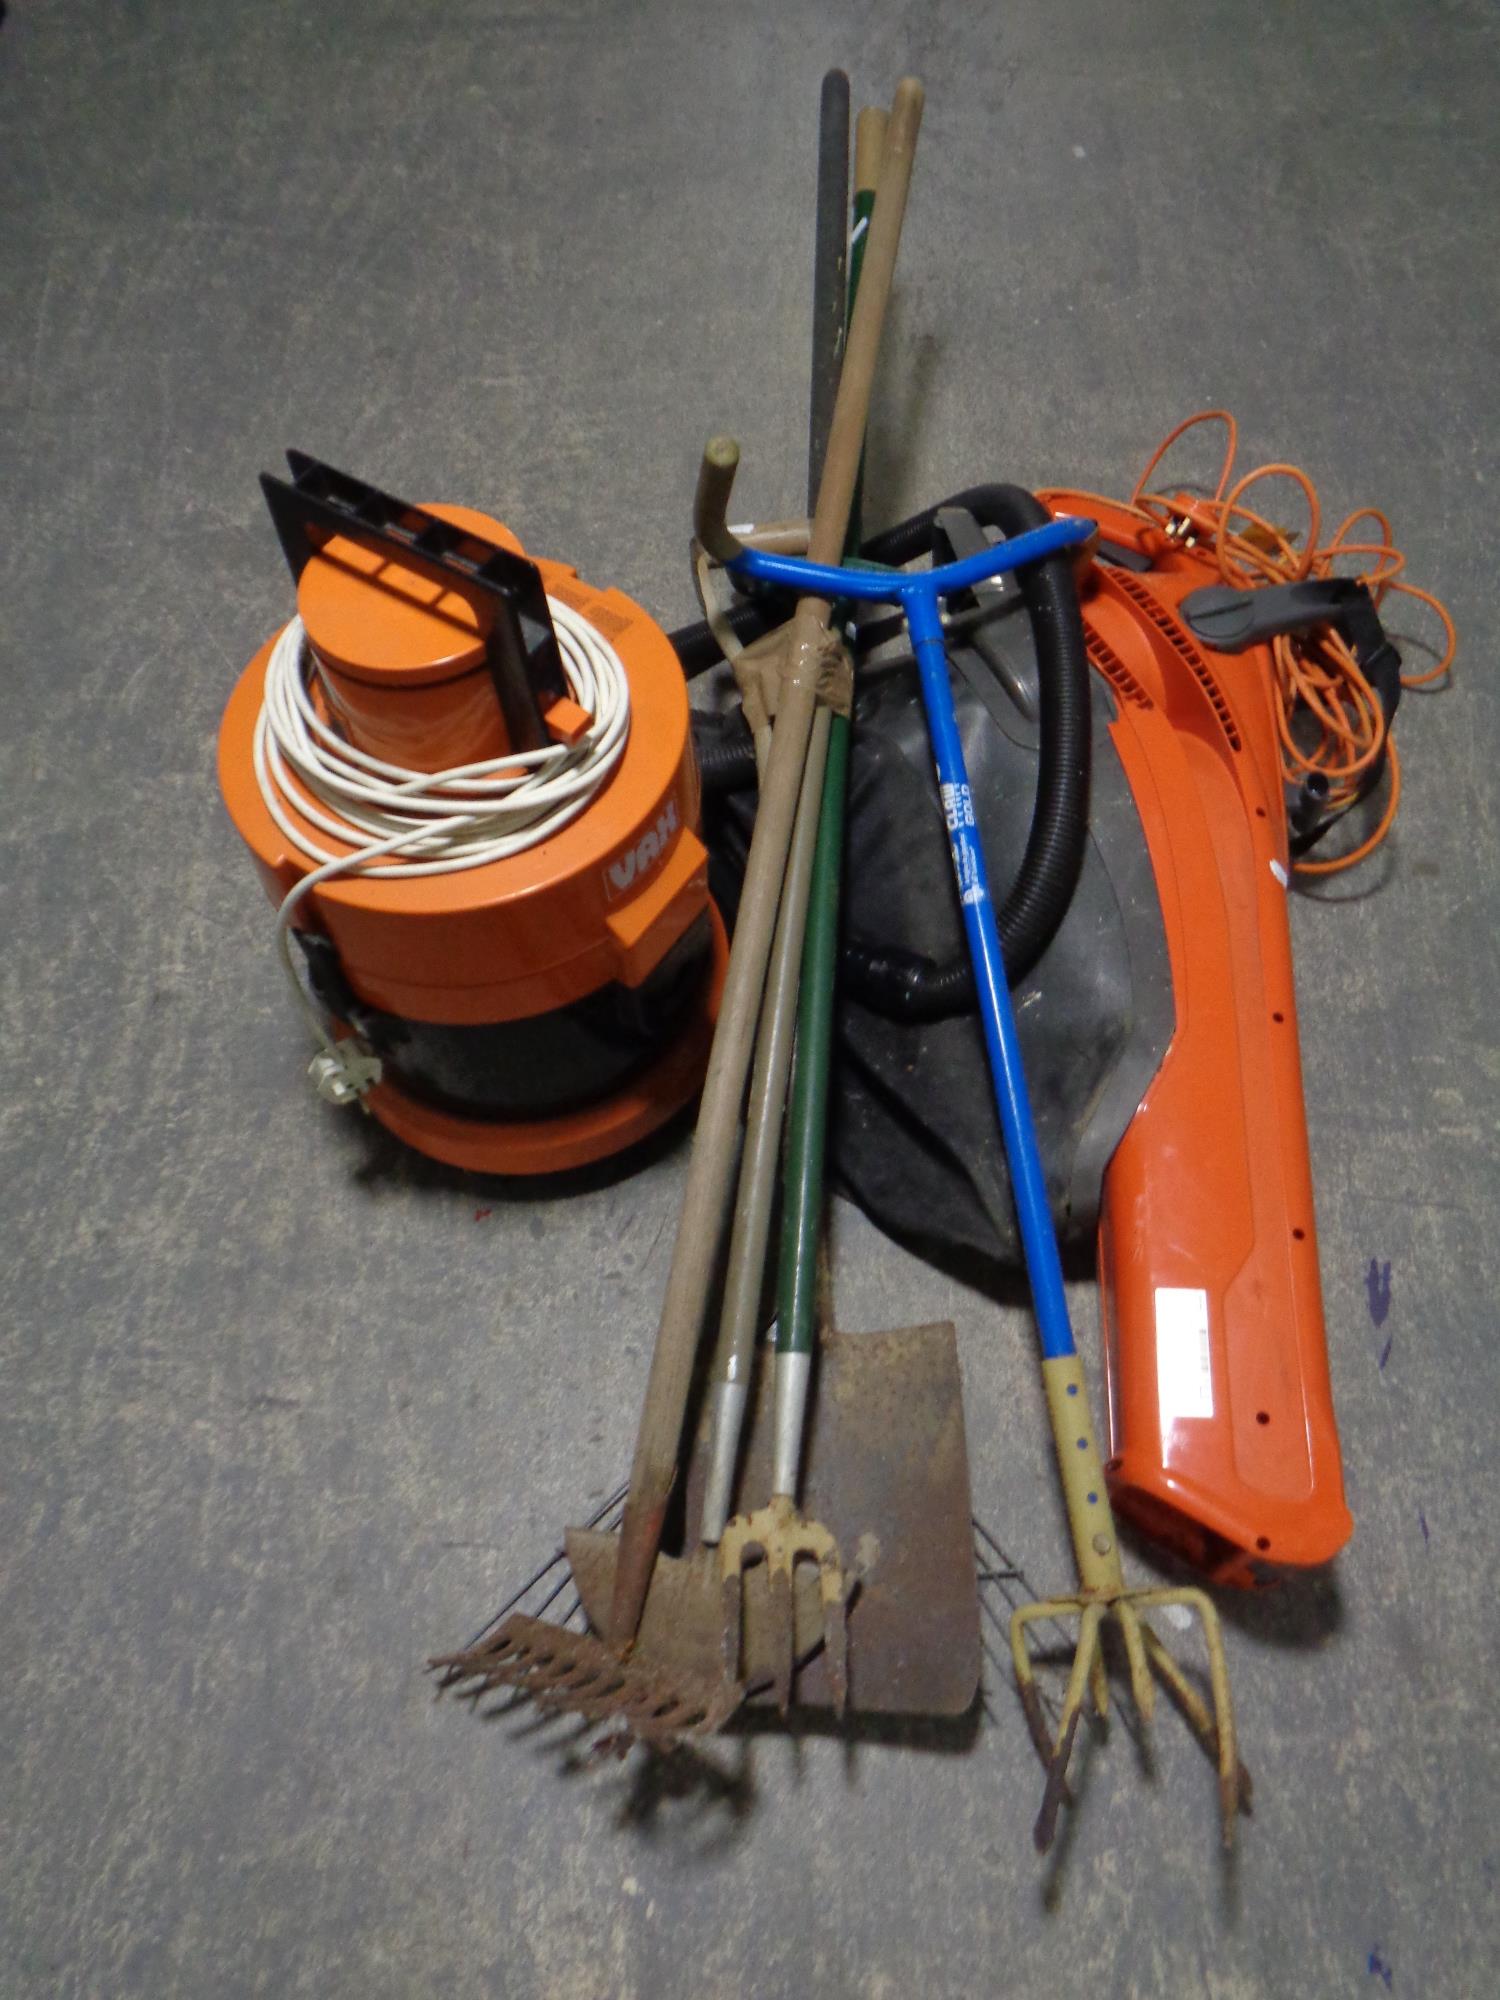 A Vax with hose together with a Flymo garden vacuum and a bundle of garden tools